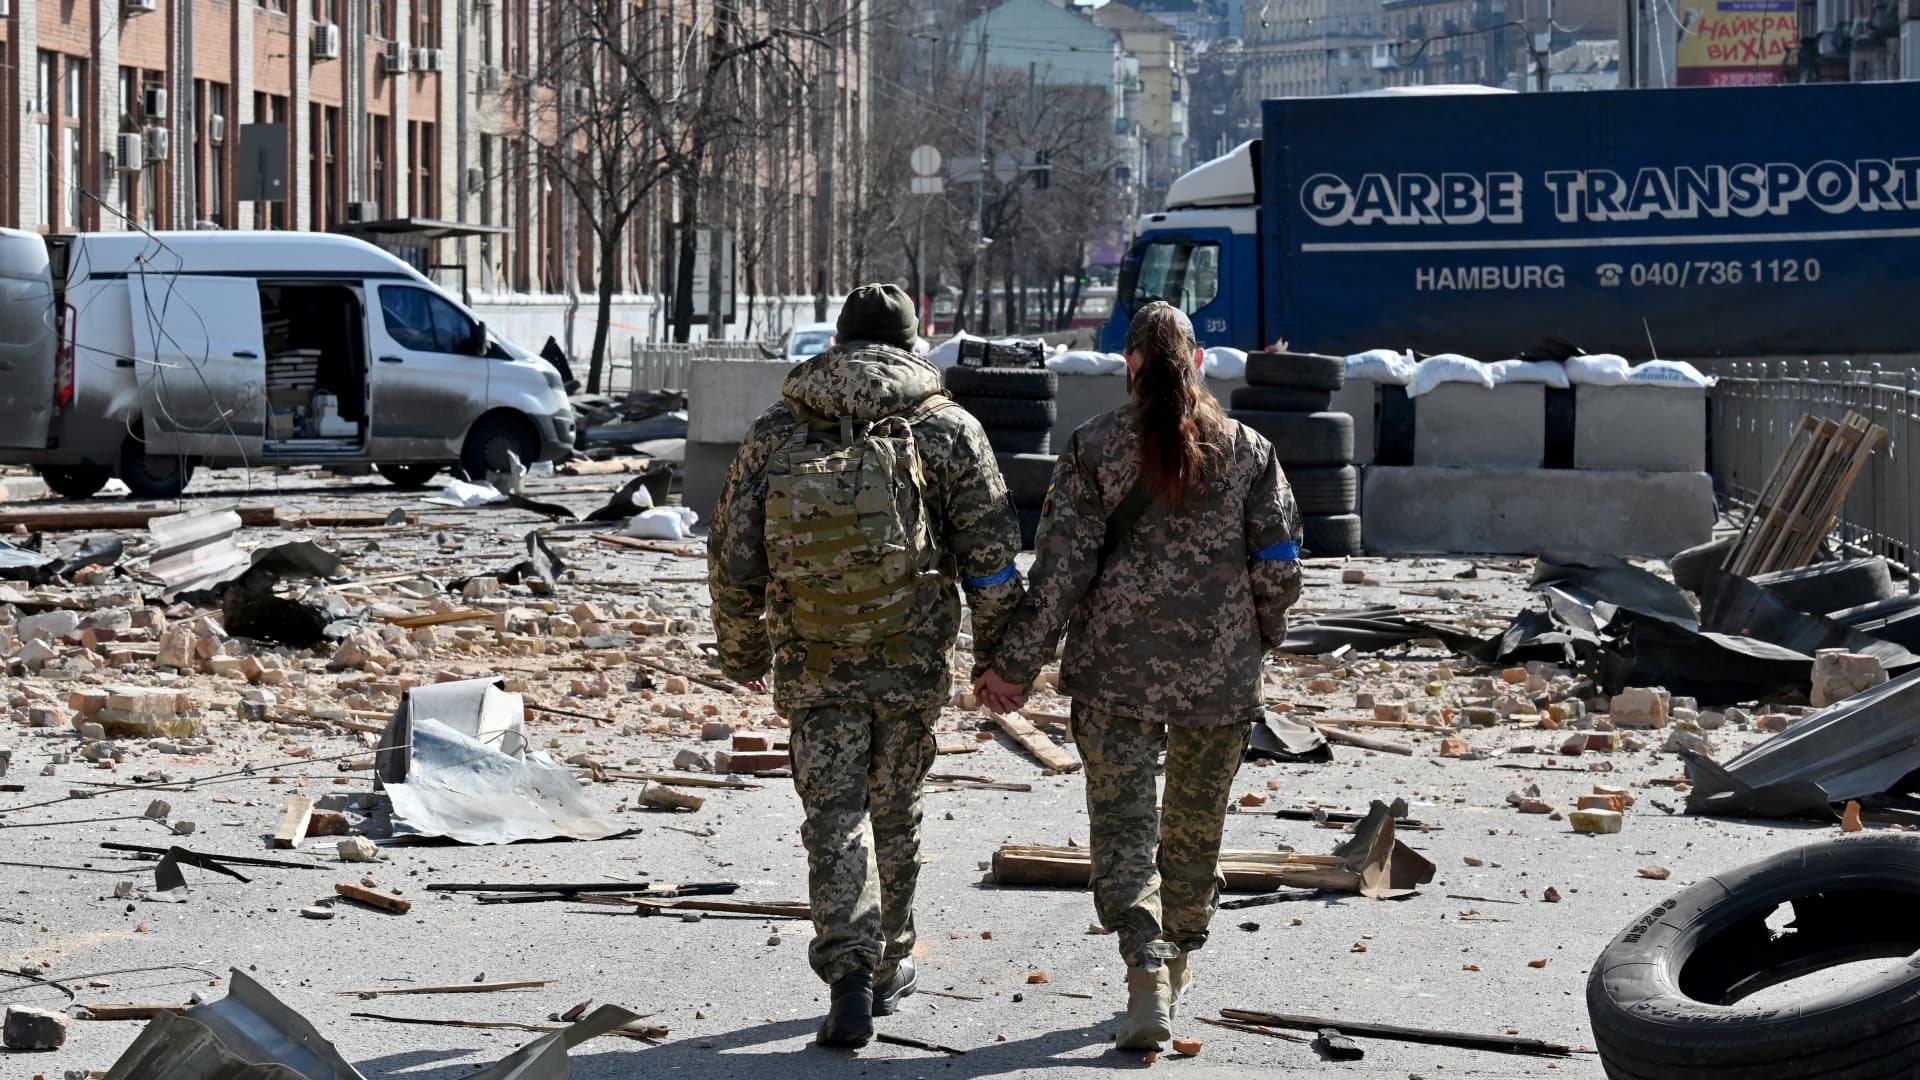 A couple of Ukrainian soldiers walks hand in hand amid Russian invasion of Ukraine in Kyiv on March 17, 2022, as Russian troops try to encircle the Ukrainian capital as part of their slow-moving offensive.